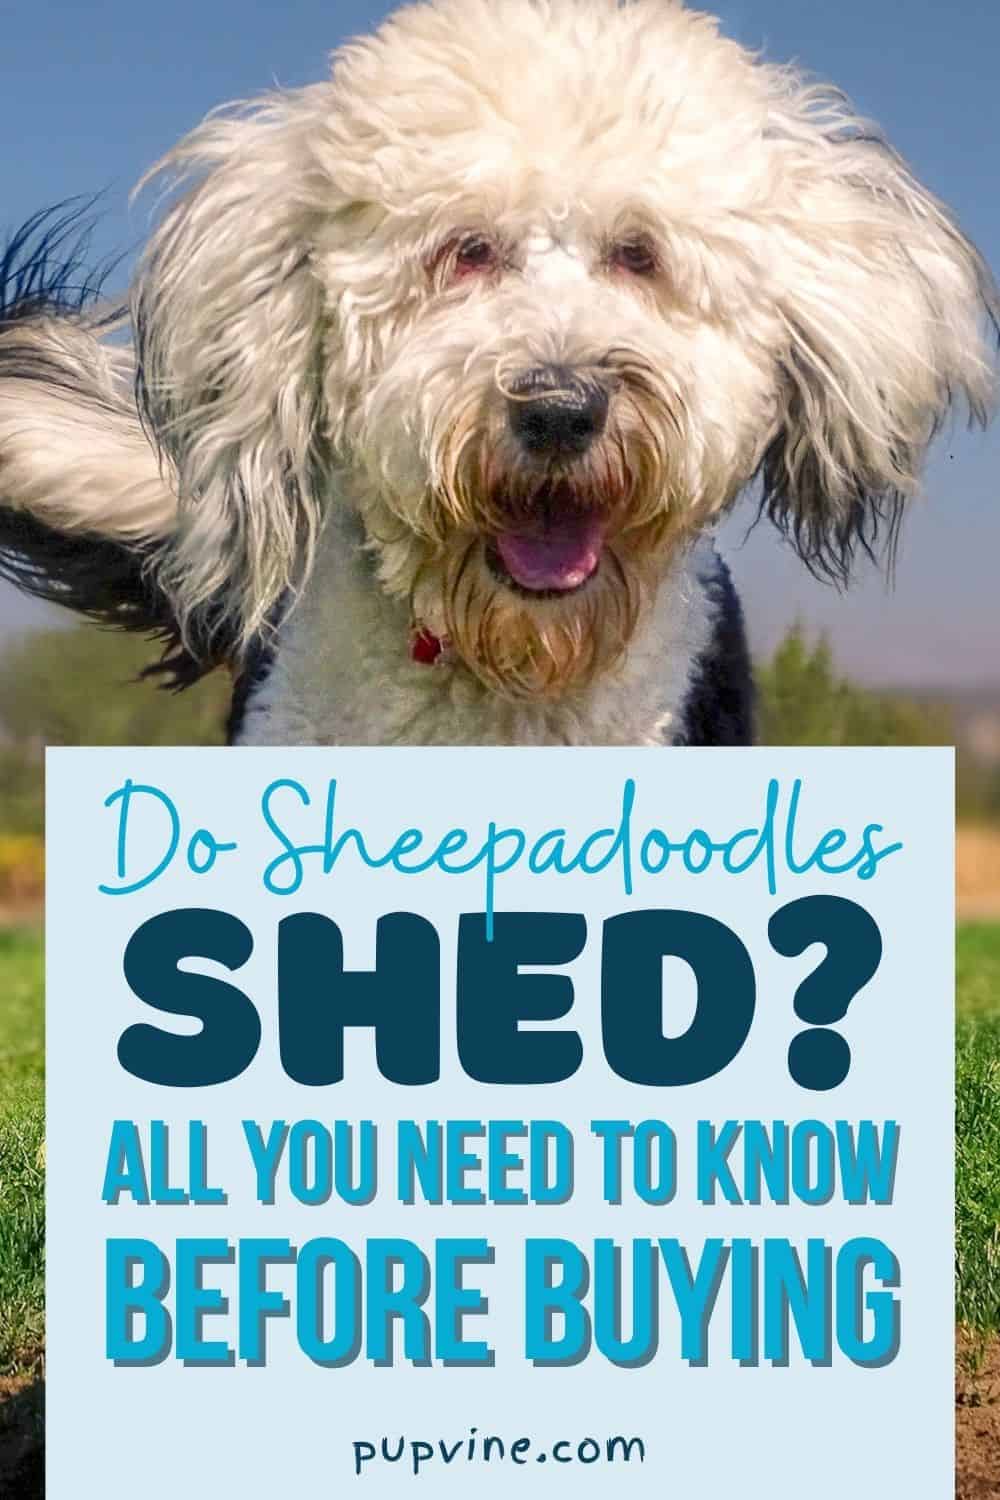 Do Sheepadoodles Shed? All You Need To Know Before Buying